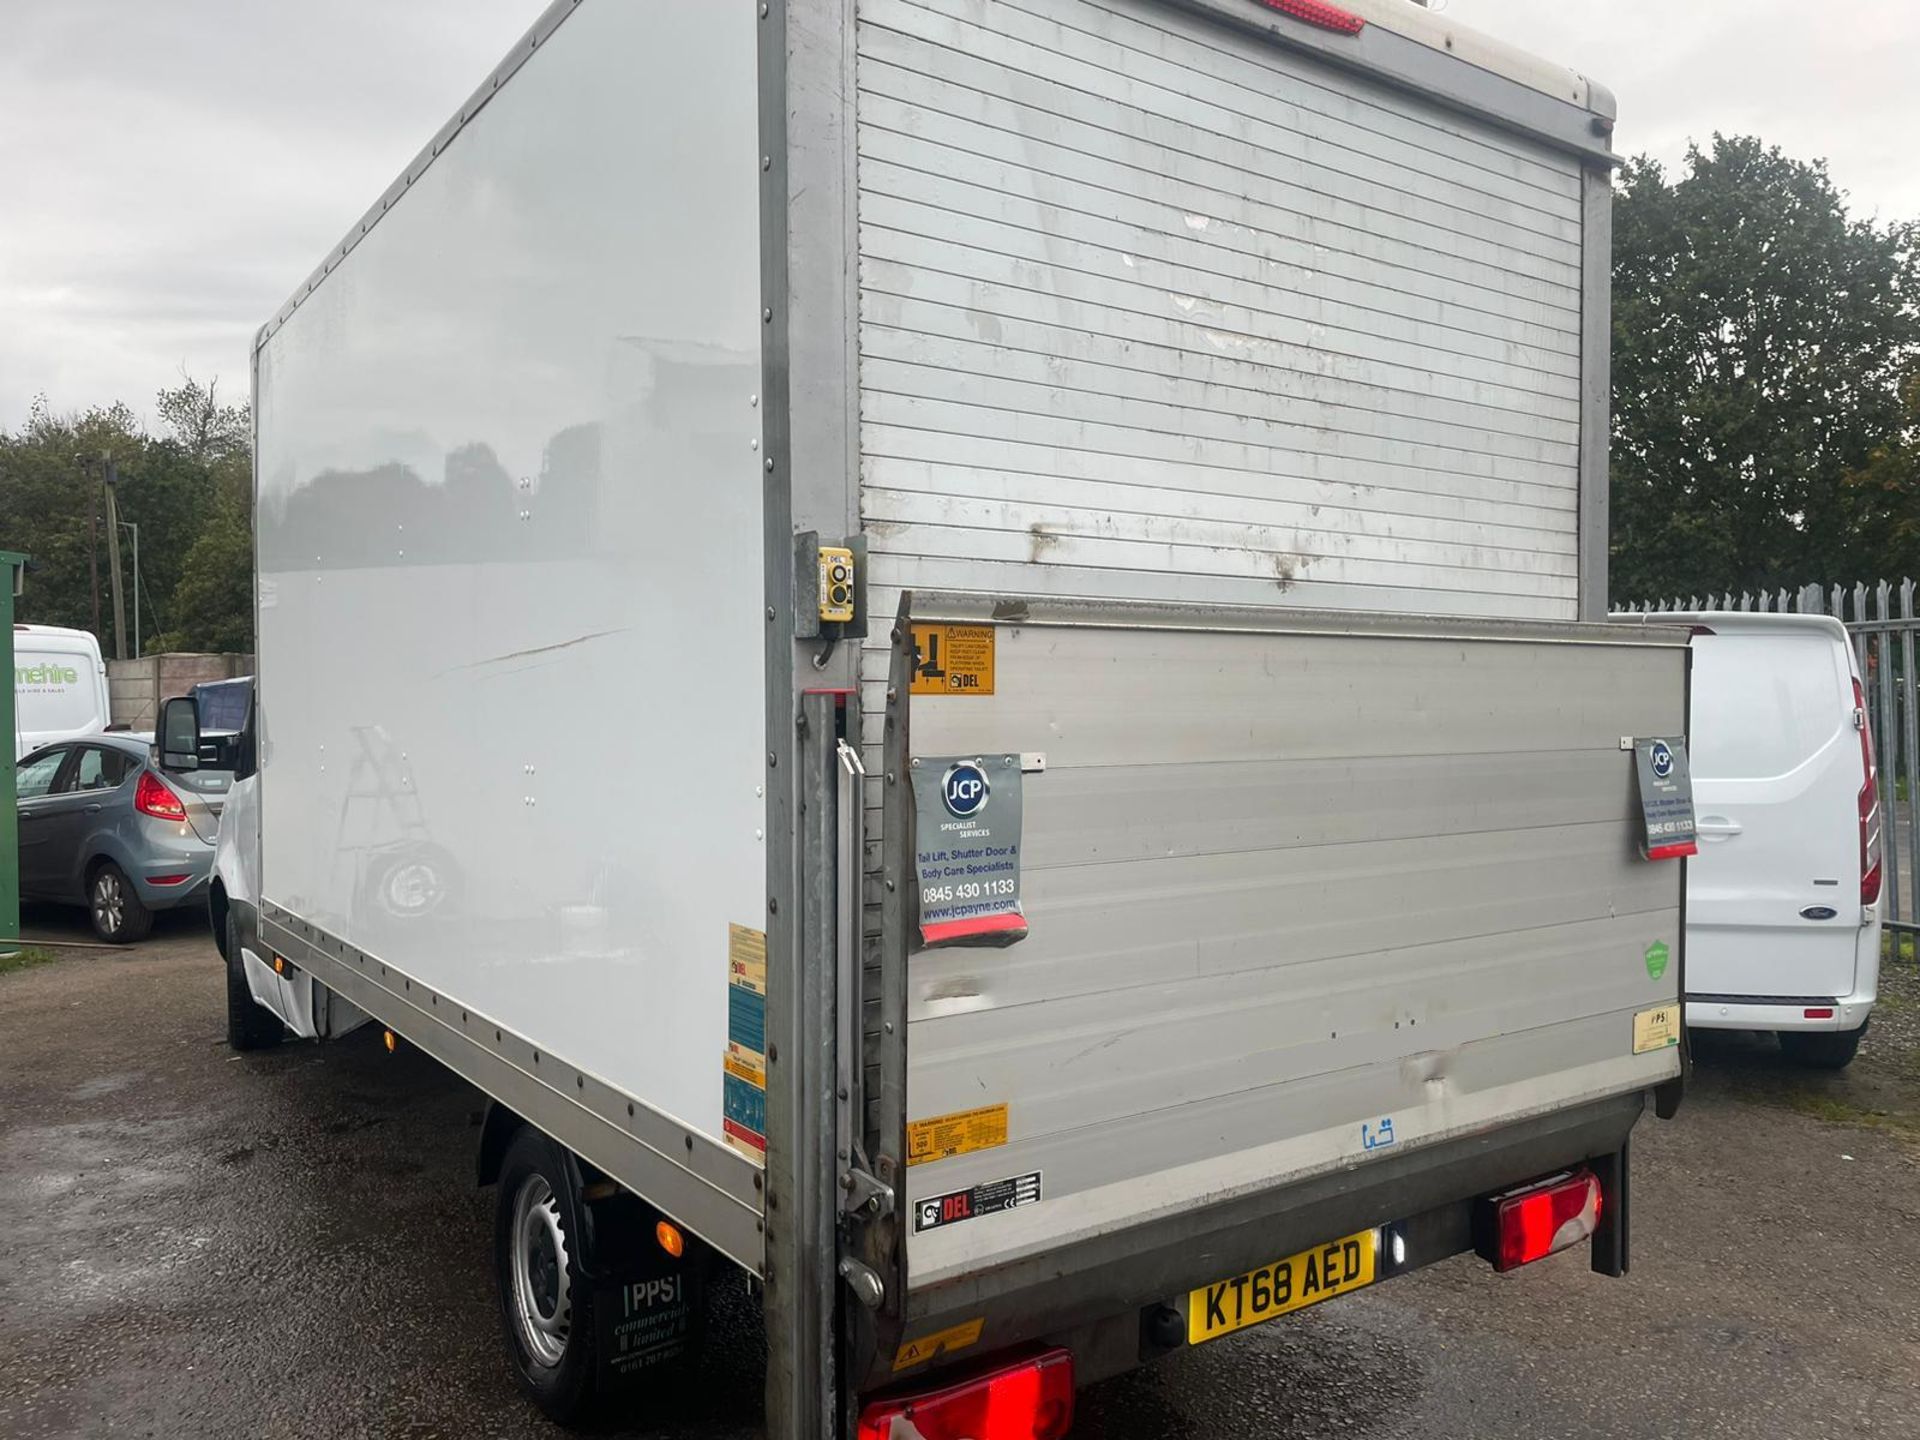 2018 MERCEDES SPRINTER 314 CDTI LUTON WITH TAIL LIFT - 108,356 WARRANTED MILES - 2.2 EURO 6 ENGINE  - Image 8 of 10